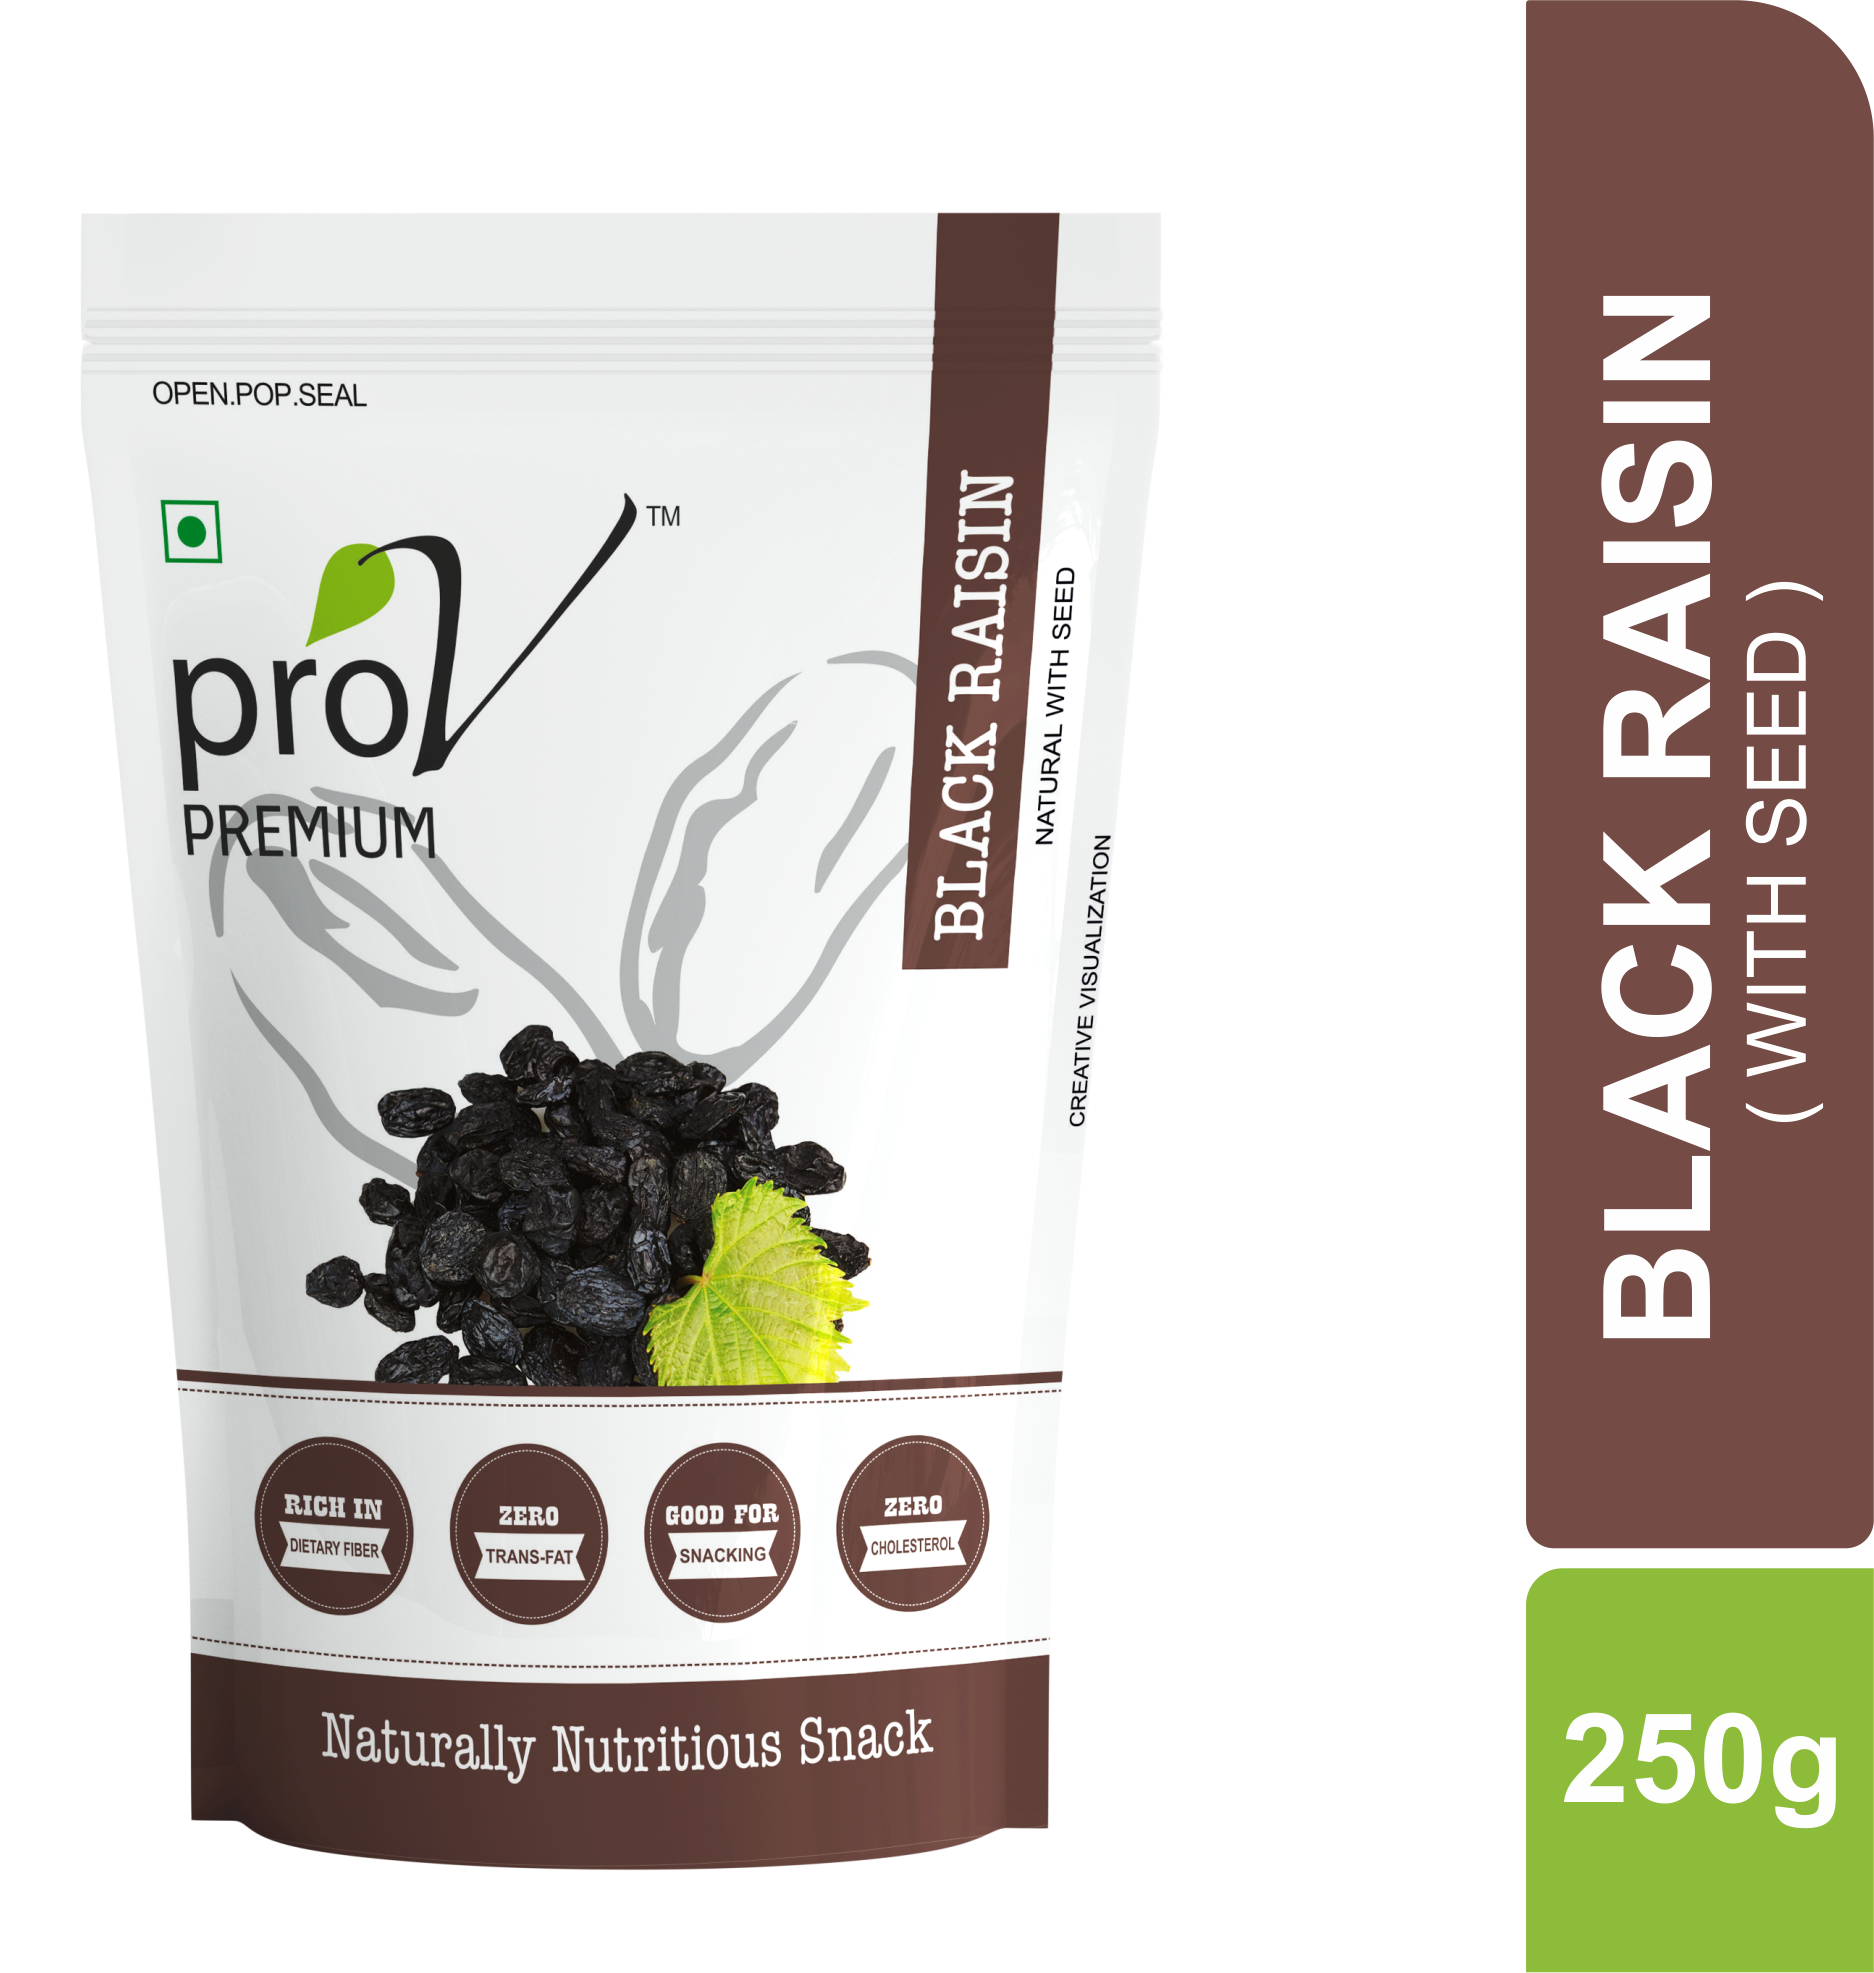 ProV Premium - Black Raisins with seed 250g - Front3d.png